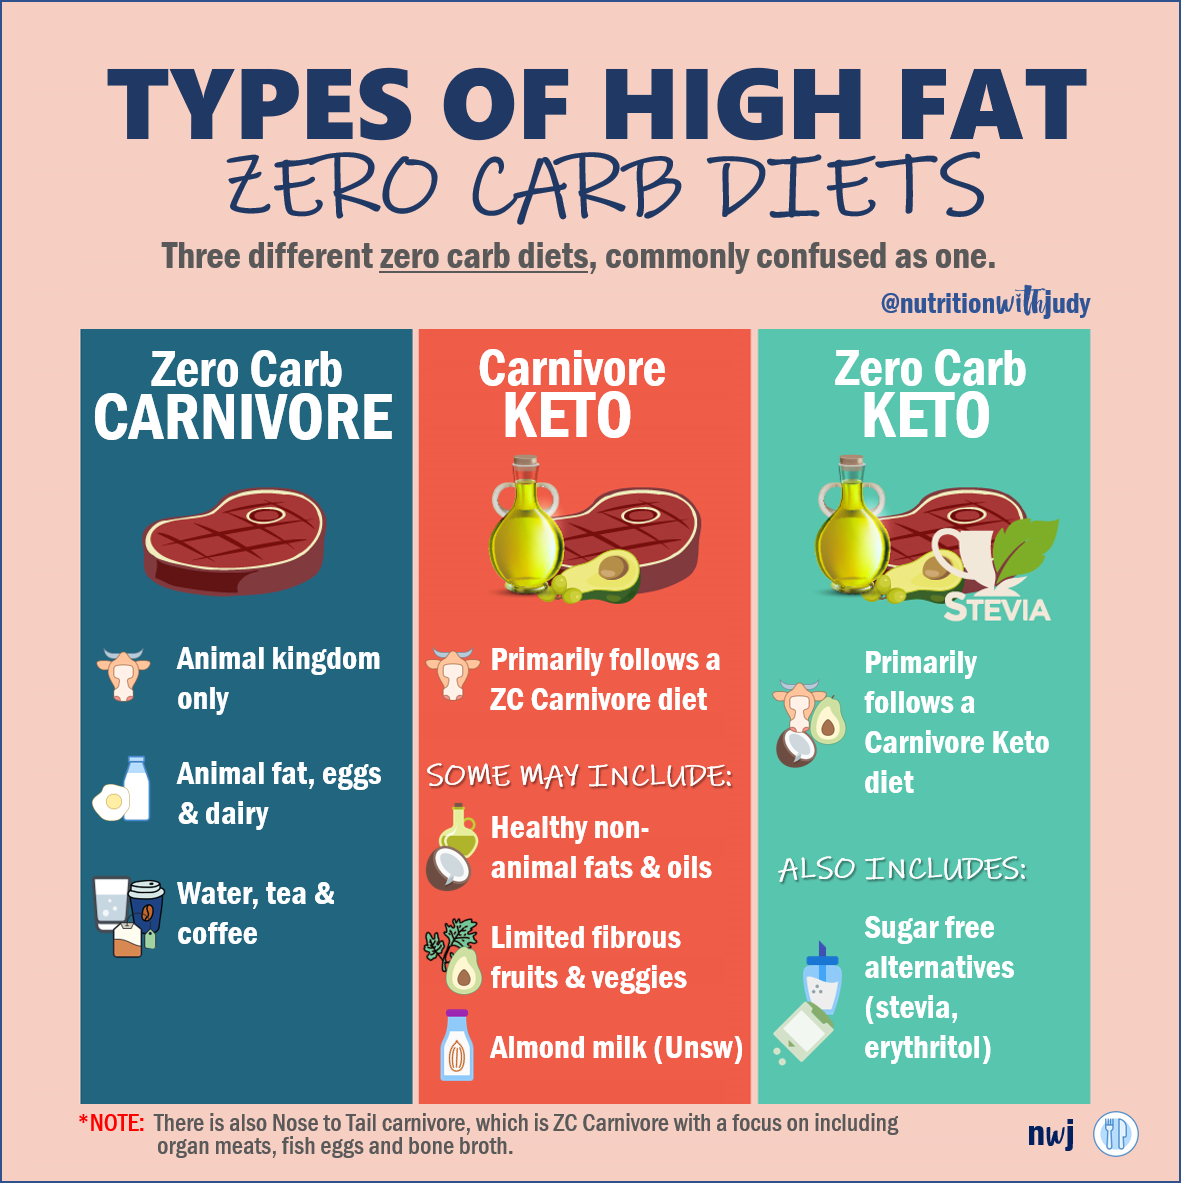 The Nutritionist’s Guide to the Carnivore Diet: A Beginner’s Guide1181 x 1190